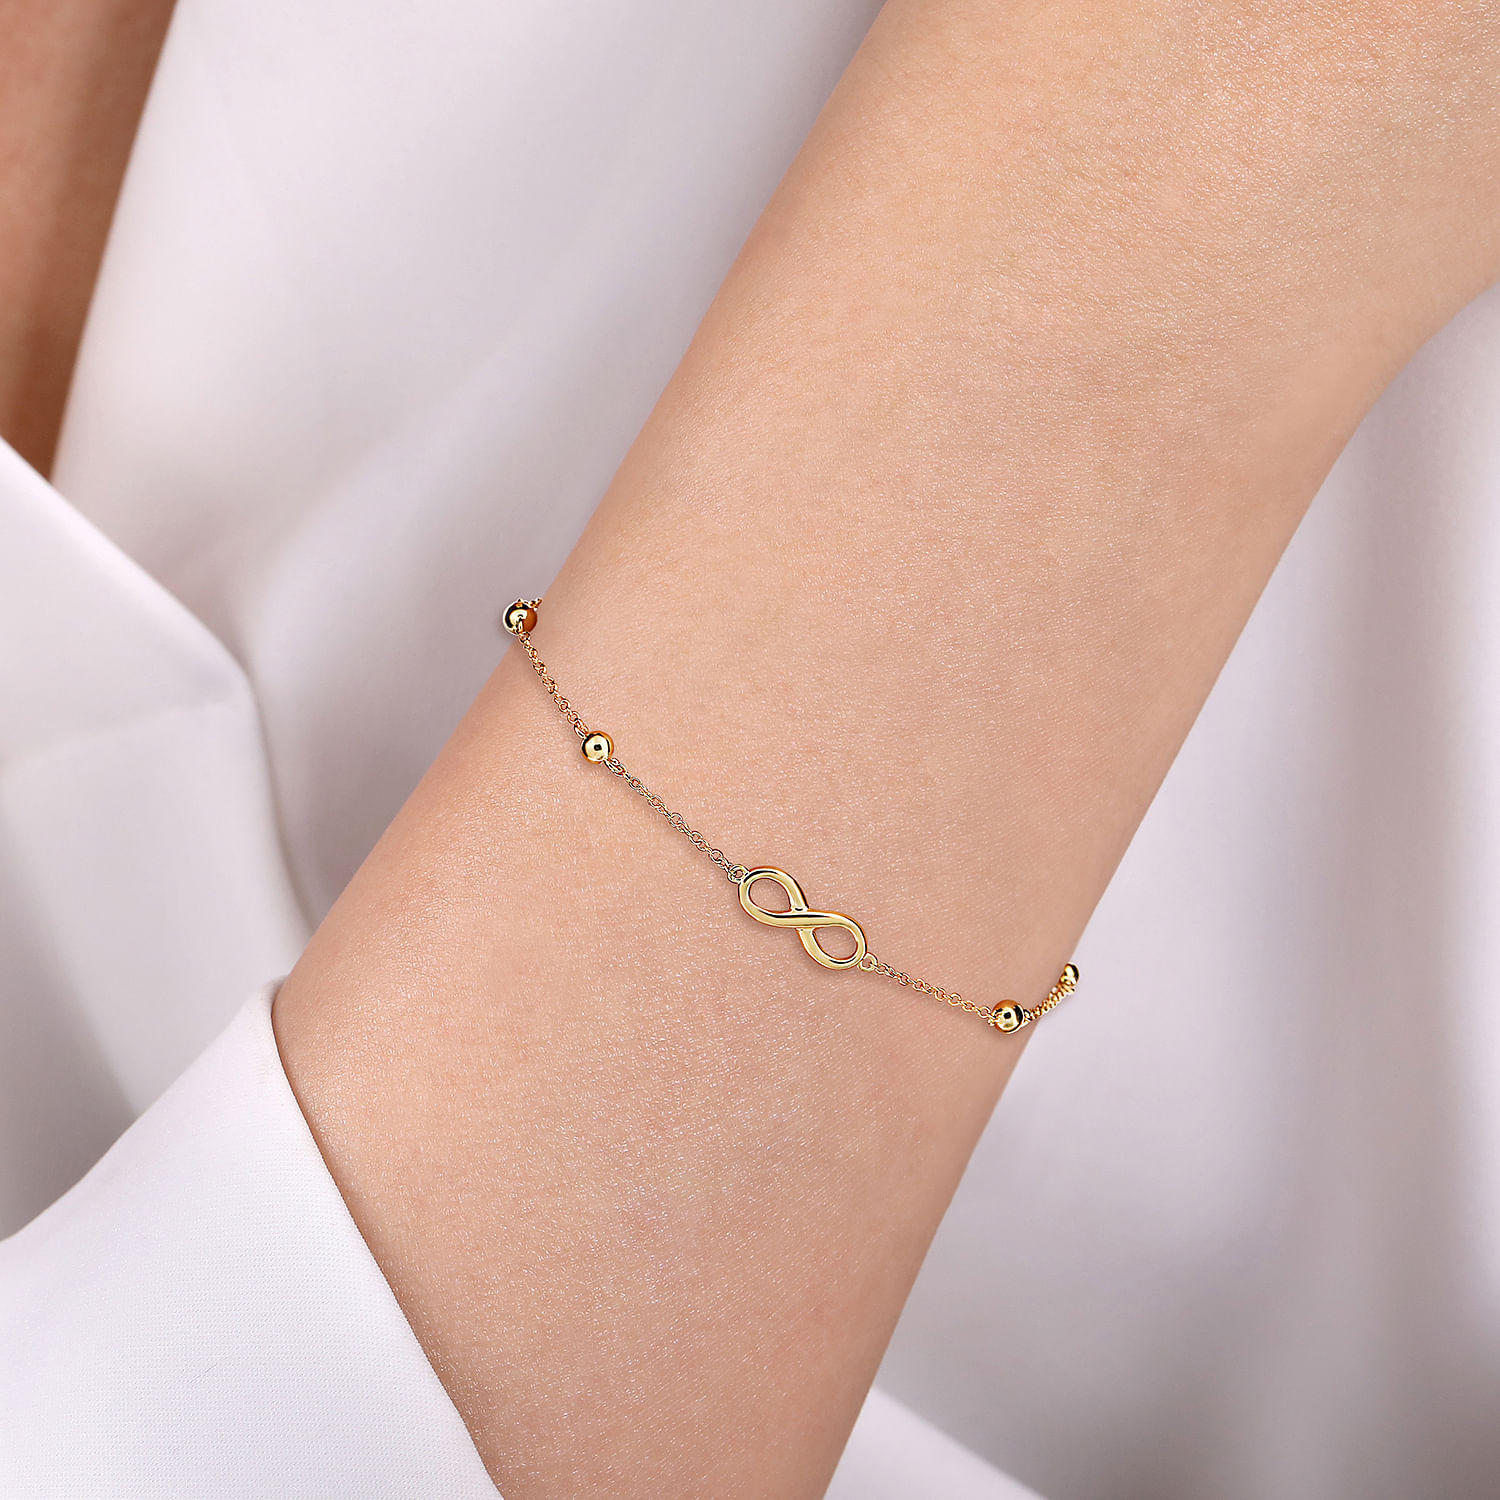 14K Yellow Gold Bujukan Chain Bracelet with Infinity Station